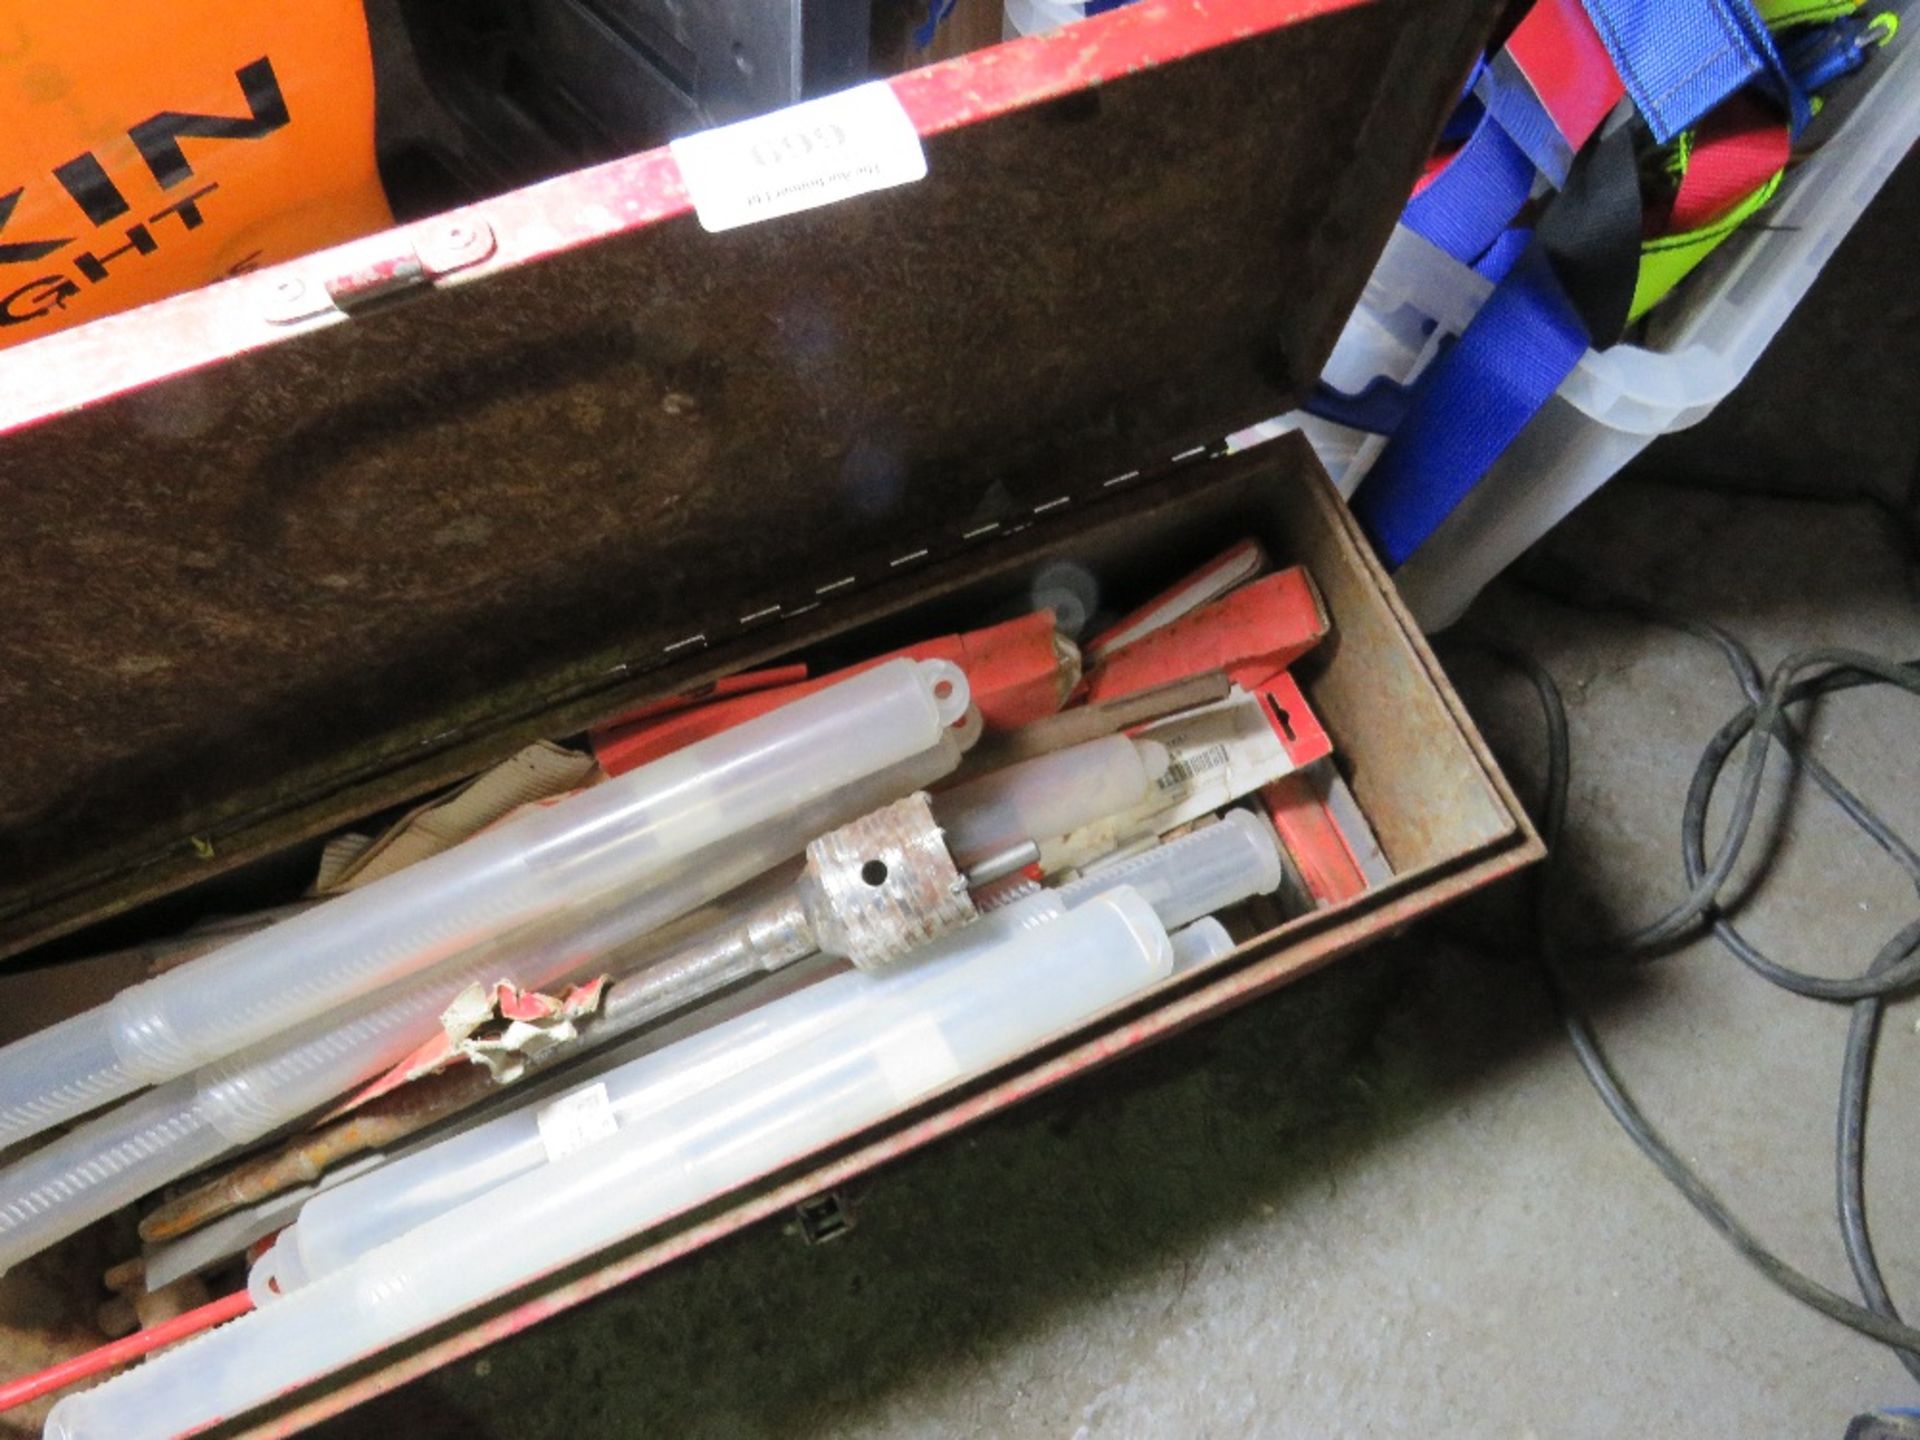 BOX OF LARGE DRILL BITS. SOURCED FROM DEPOT CLEARANCE DUE TO A CHANGE IN COMPANY POLICY. - Image 2 of 2